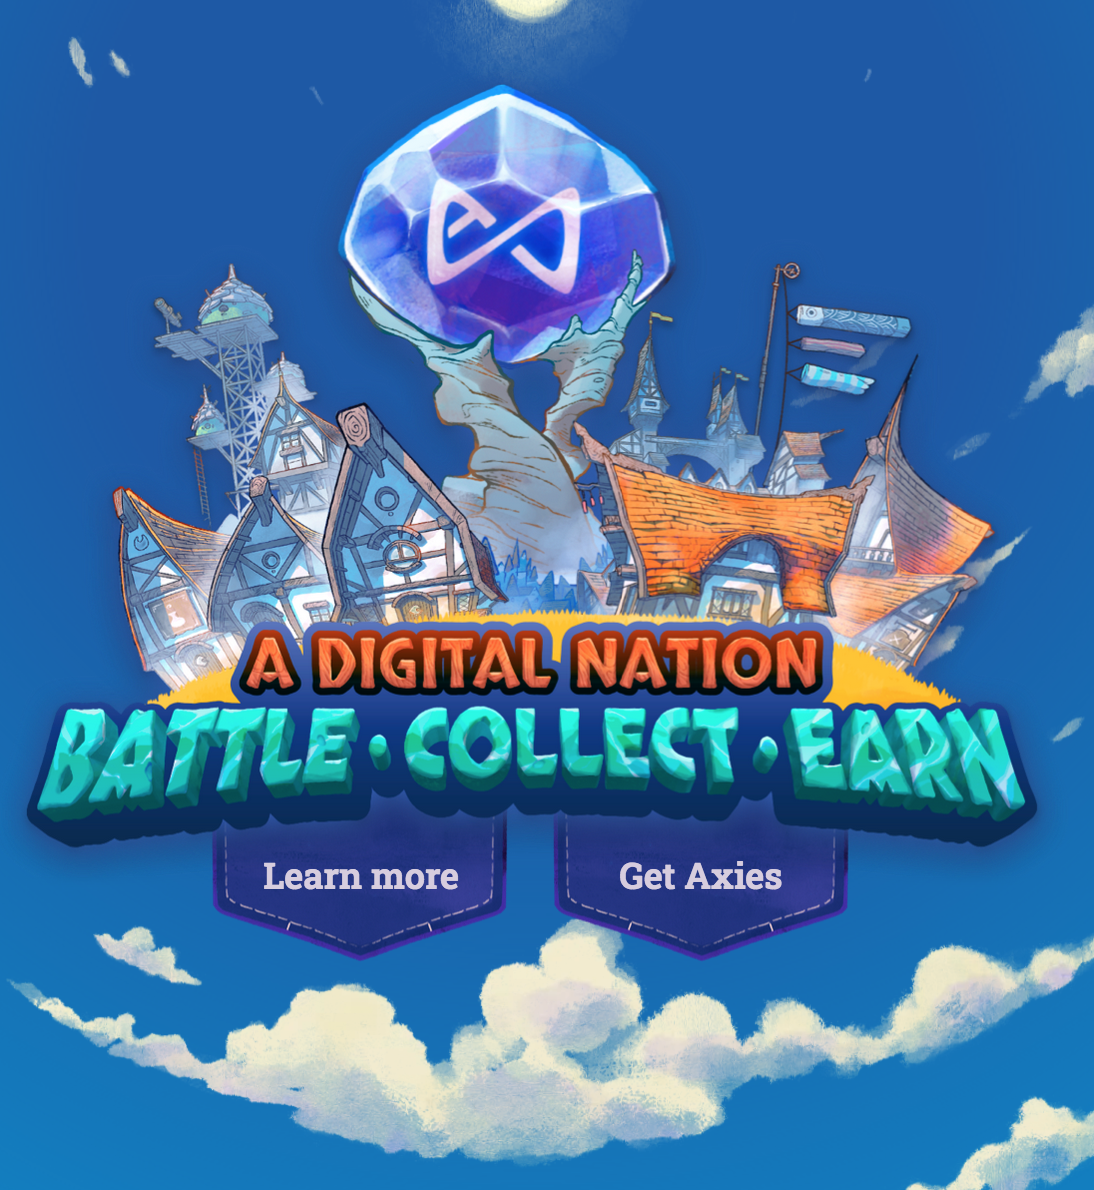 The Ultimate Marketplace For Bitcoin-Based (And Other) Games (#GotBitcoin)